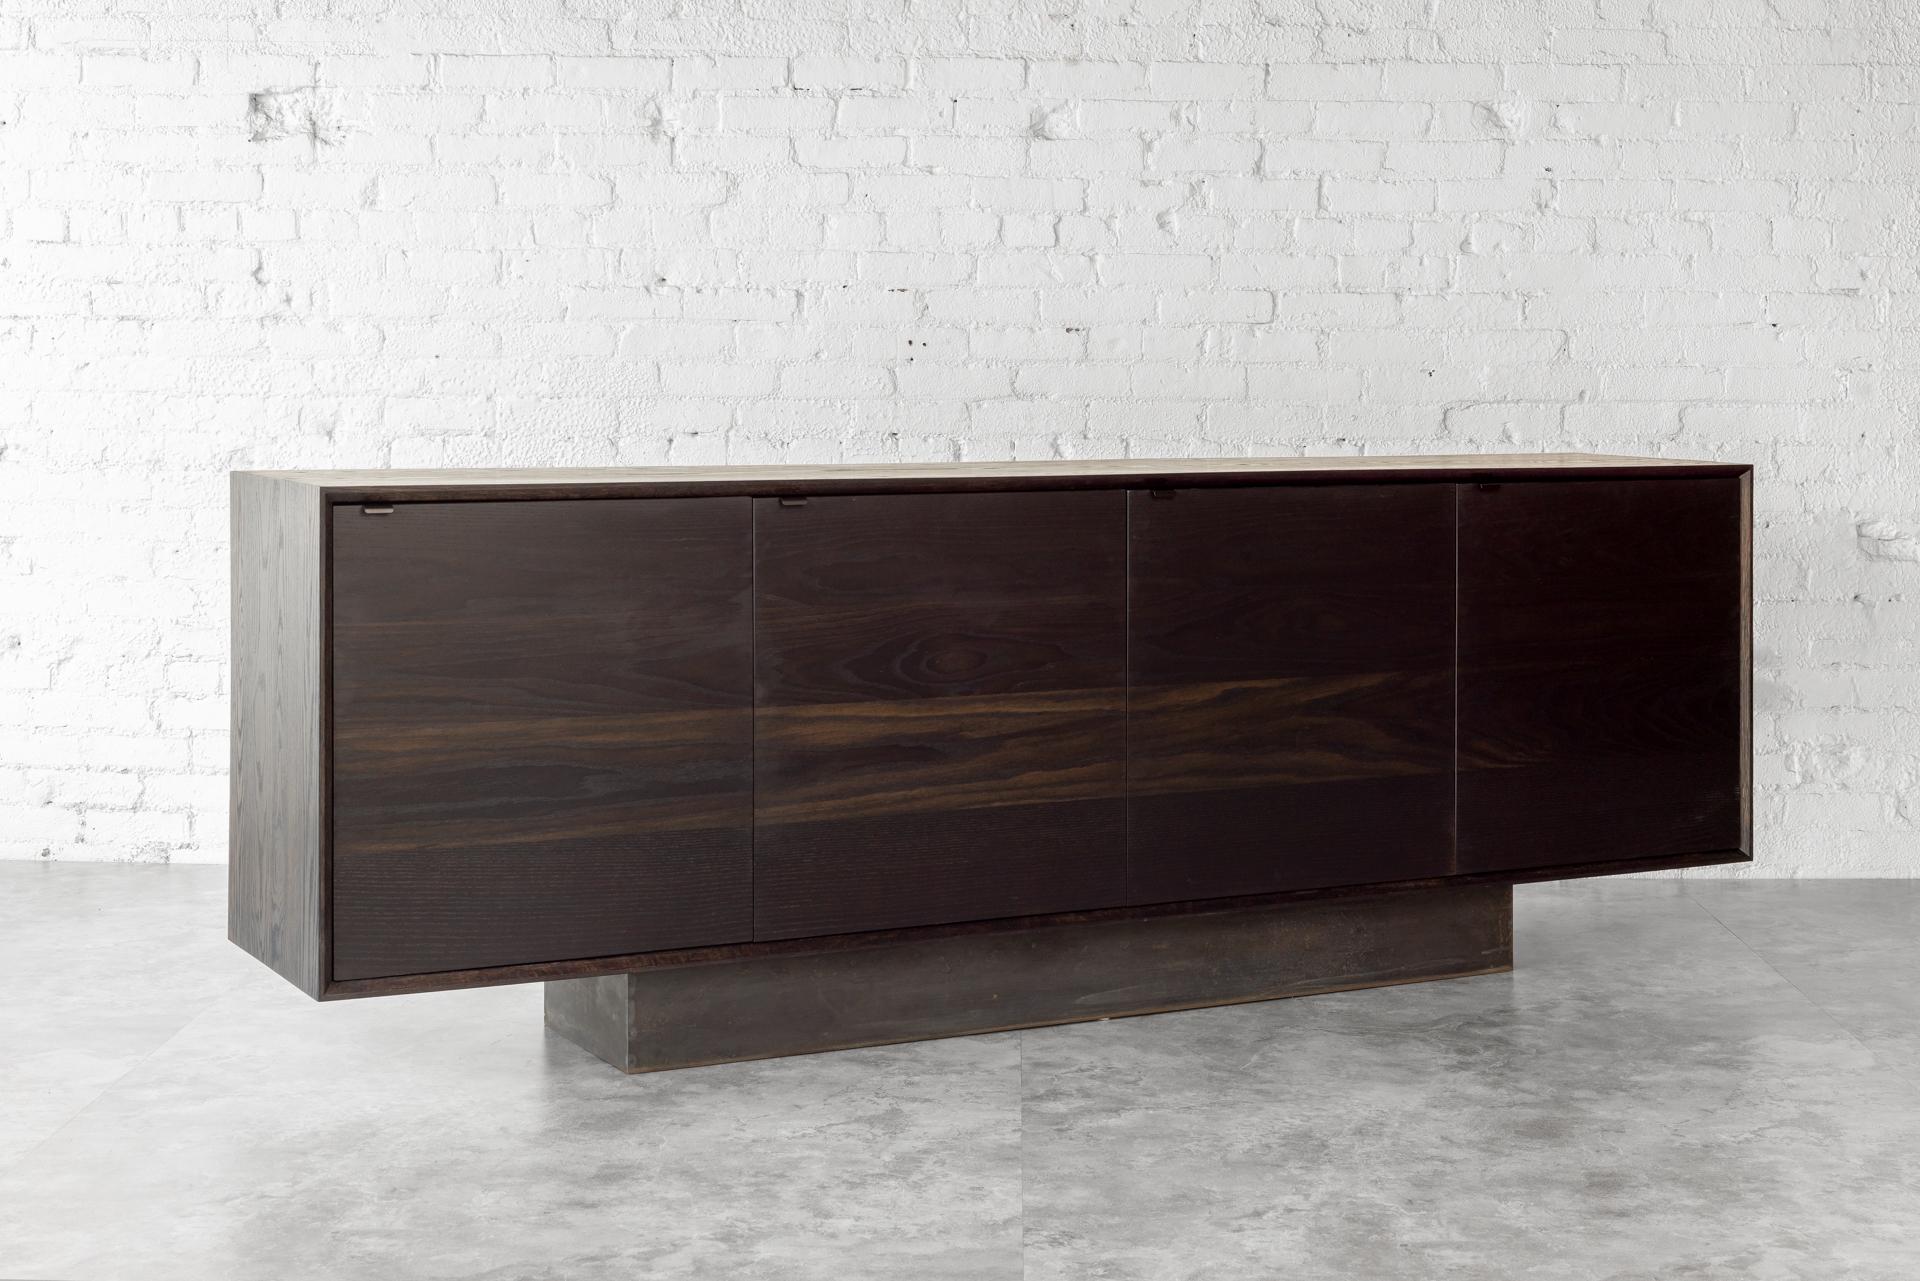 Solid blackened oak credenza constructed with uncommonly practiced solid wood carcass, cabinet doors, and interior shelves. Four cabinet doors, with interior shelves. Black steel door pulls, soft close hinges set on a blackened steel base for